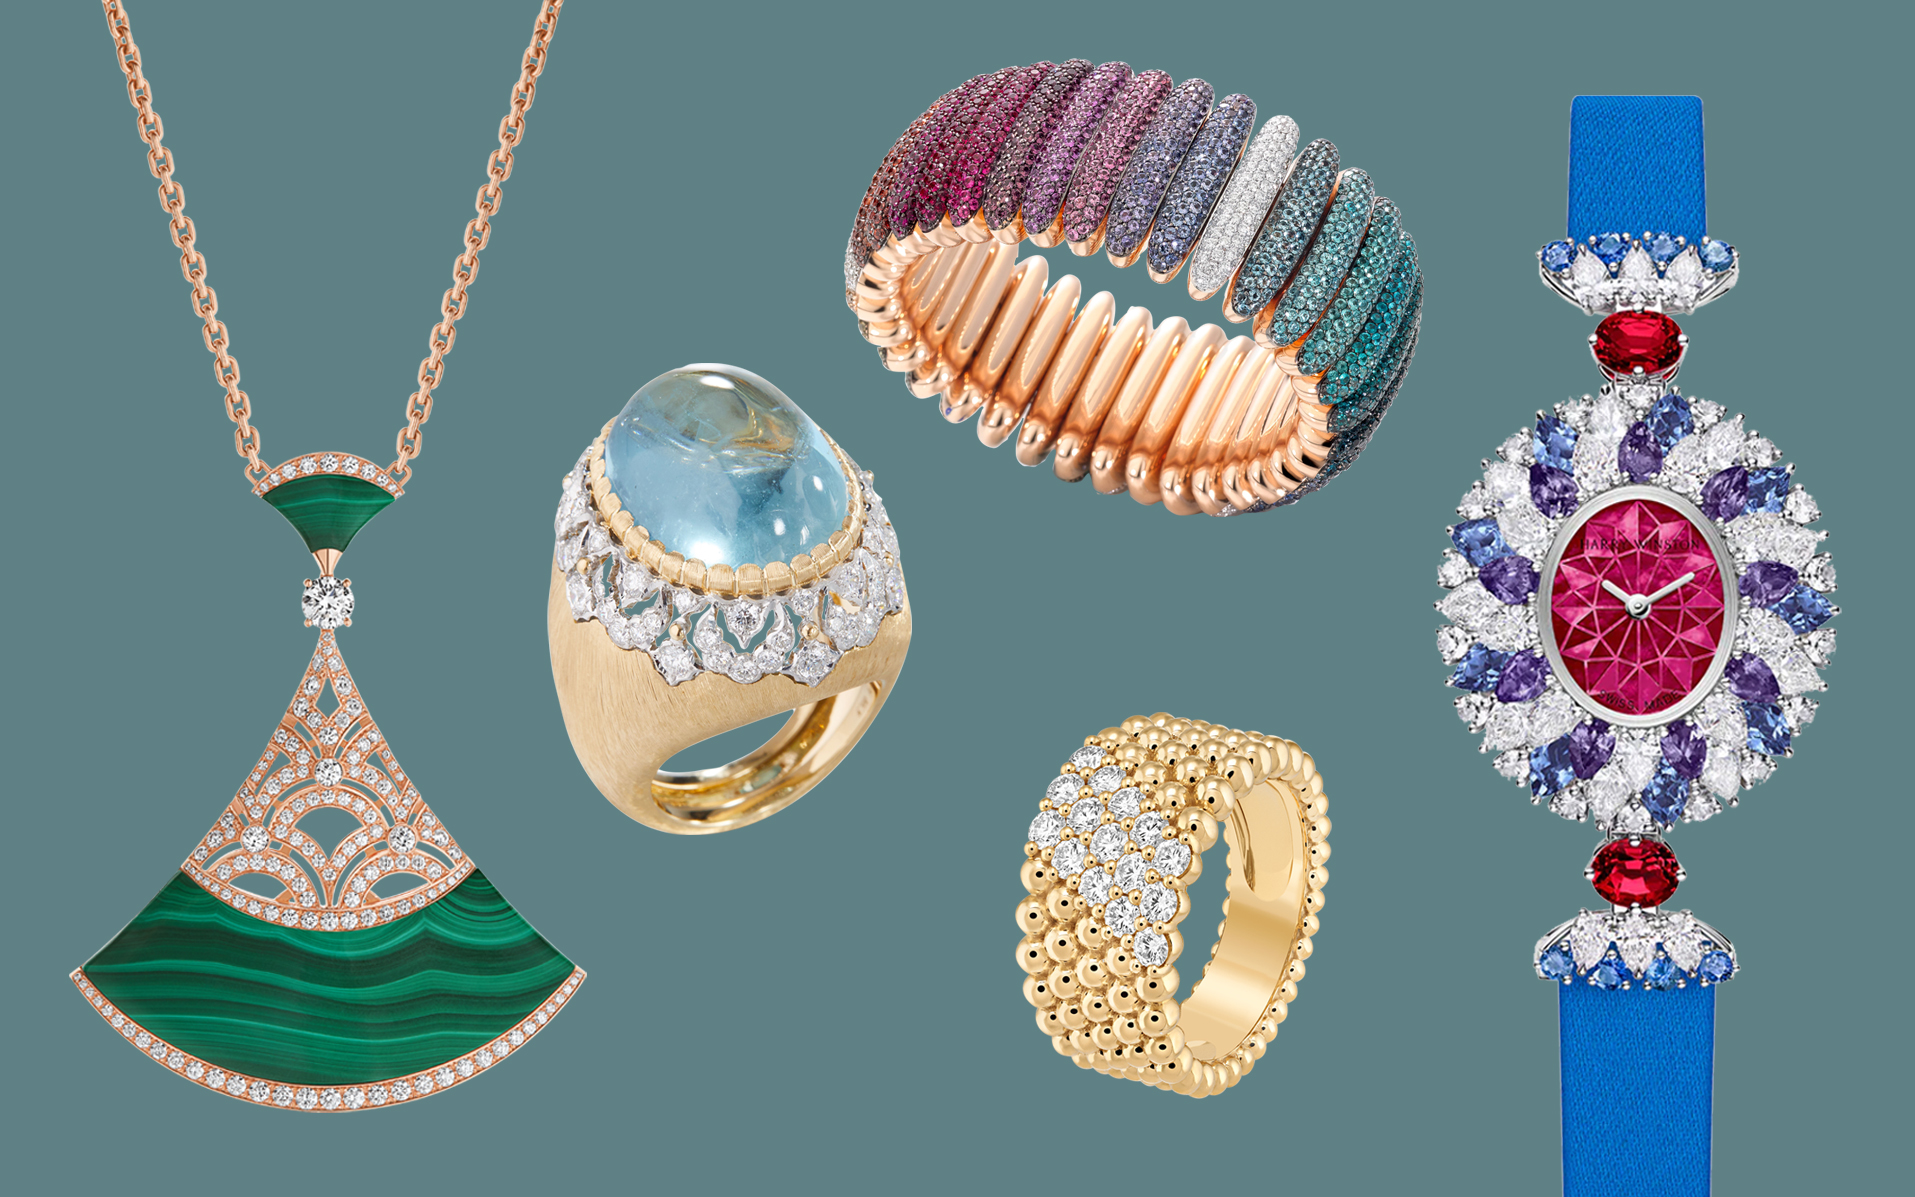 A Guide To The Most Extravagant Jewelry To Gift This Season